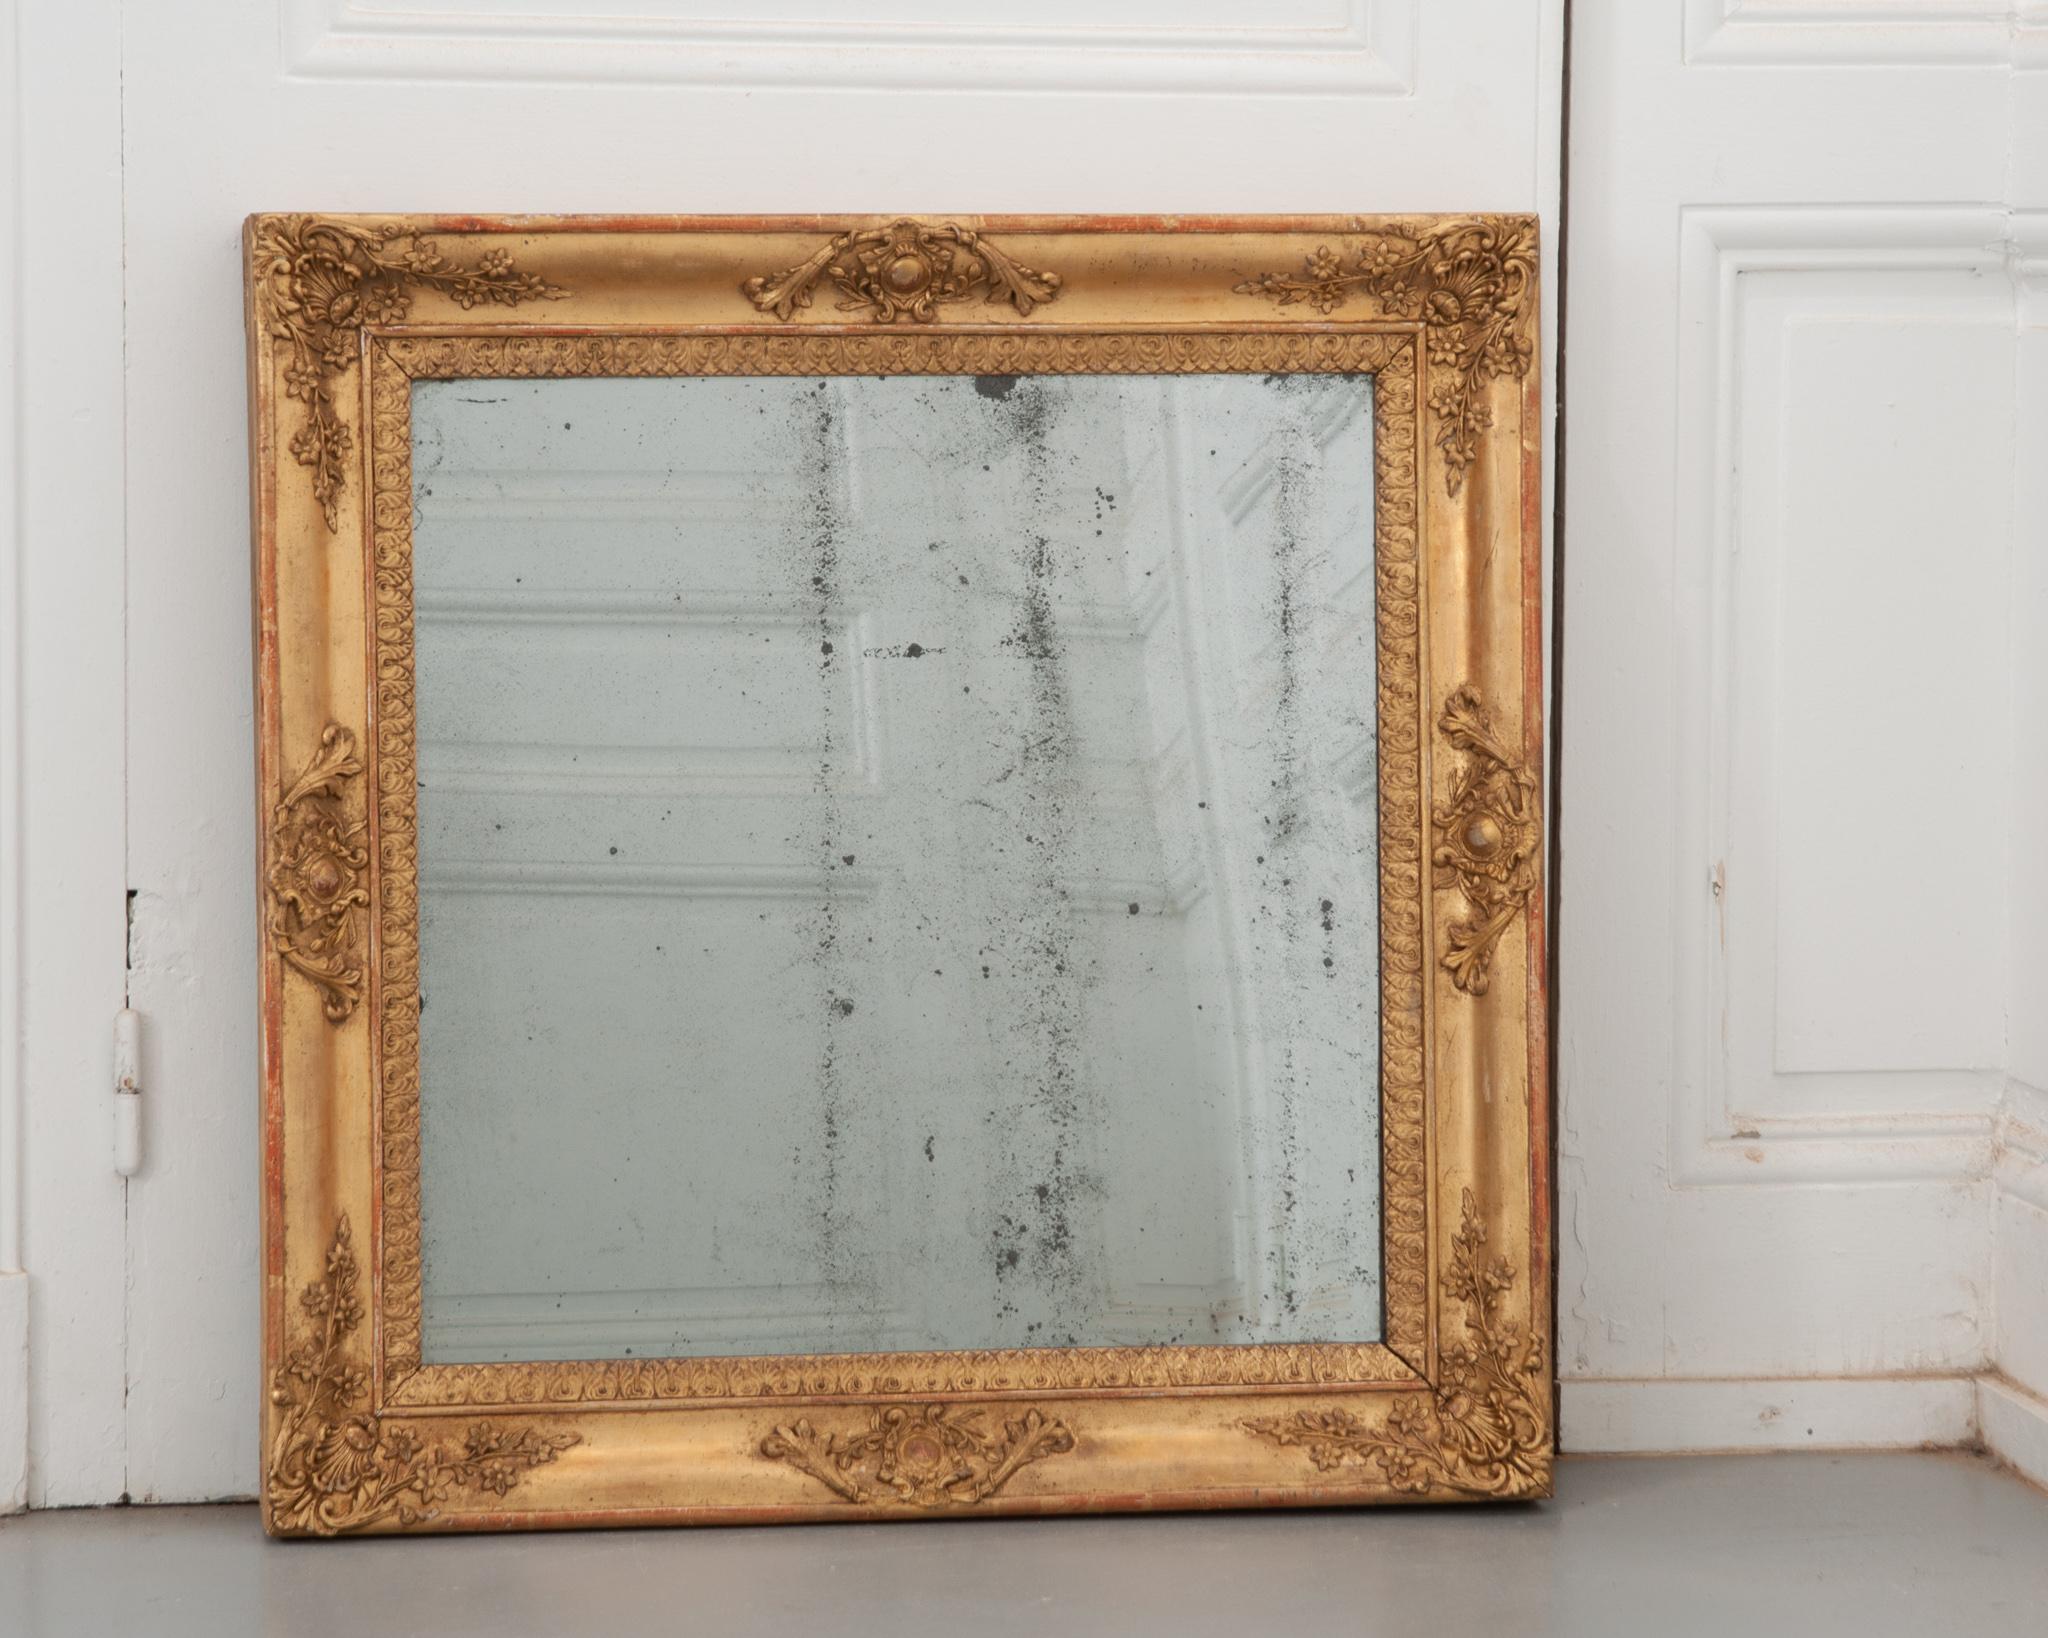 A stunning, symmetrical Empire style mirror from 19th century France! With its original mirror plate, some wonderful foxing is present while providing a clear reflection. The square frame is dripping with hand carved details on each side; crests